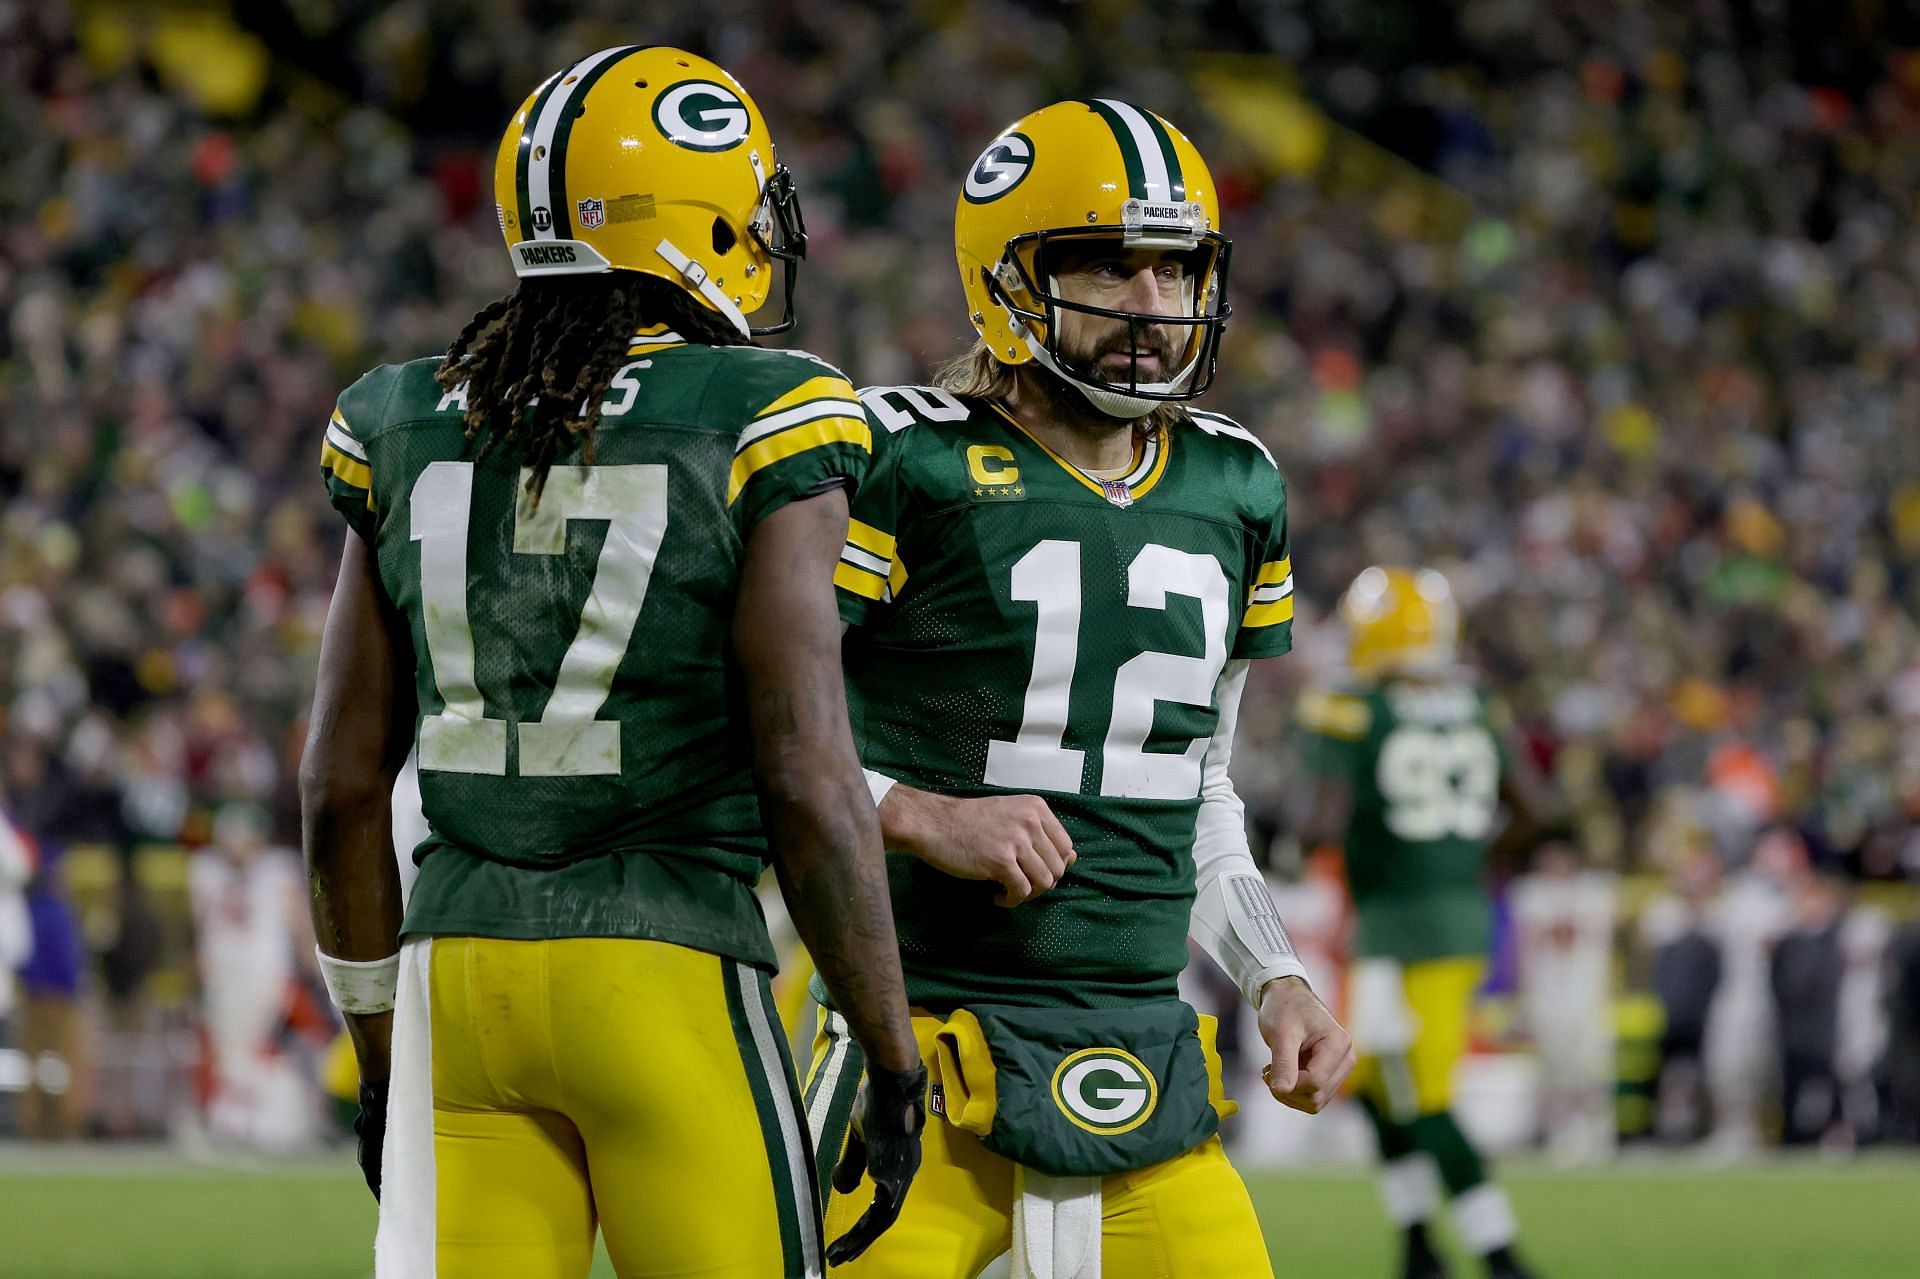 Davante Adams (#17) and Aaron Rodgers (#12) with the Packers